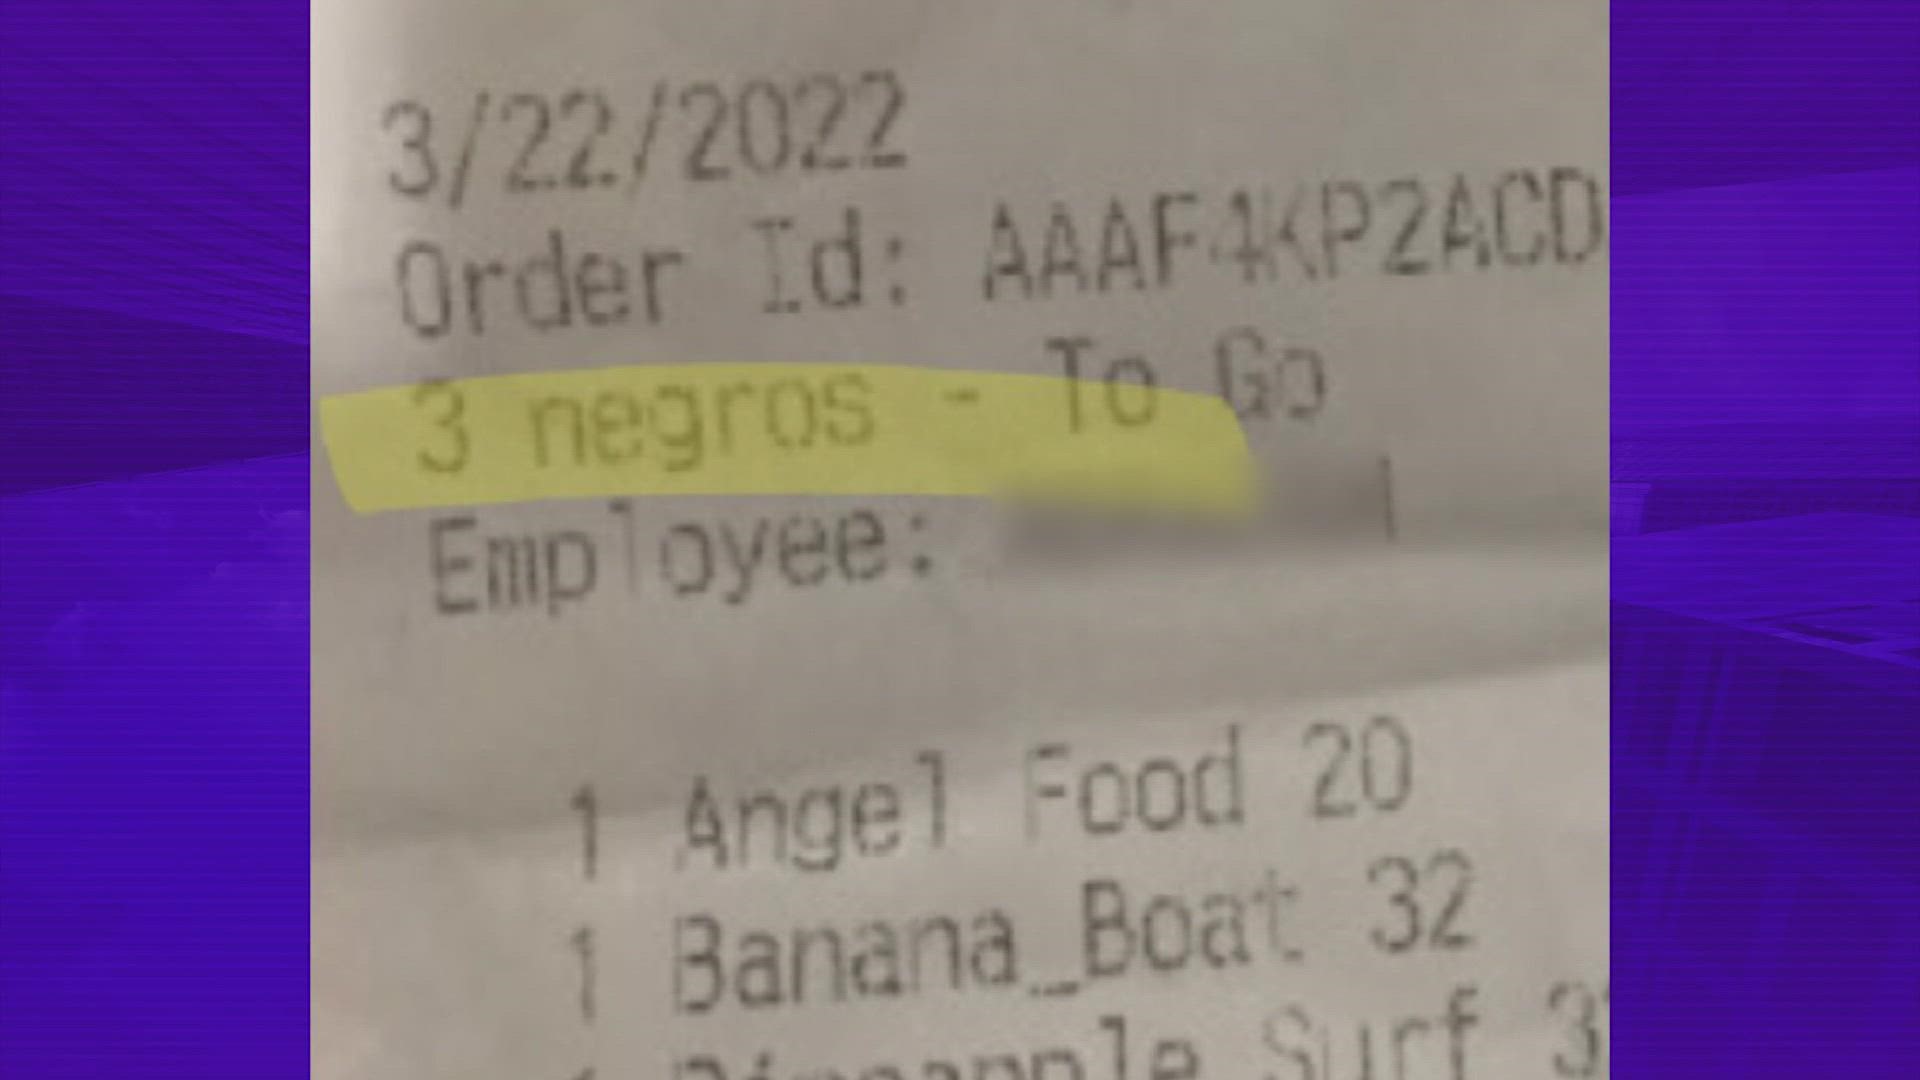 A Conroe Smoothie King employee has been fired after reportedly issuing a controversial receipt describing three African American customers as "3 negros."